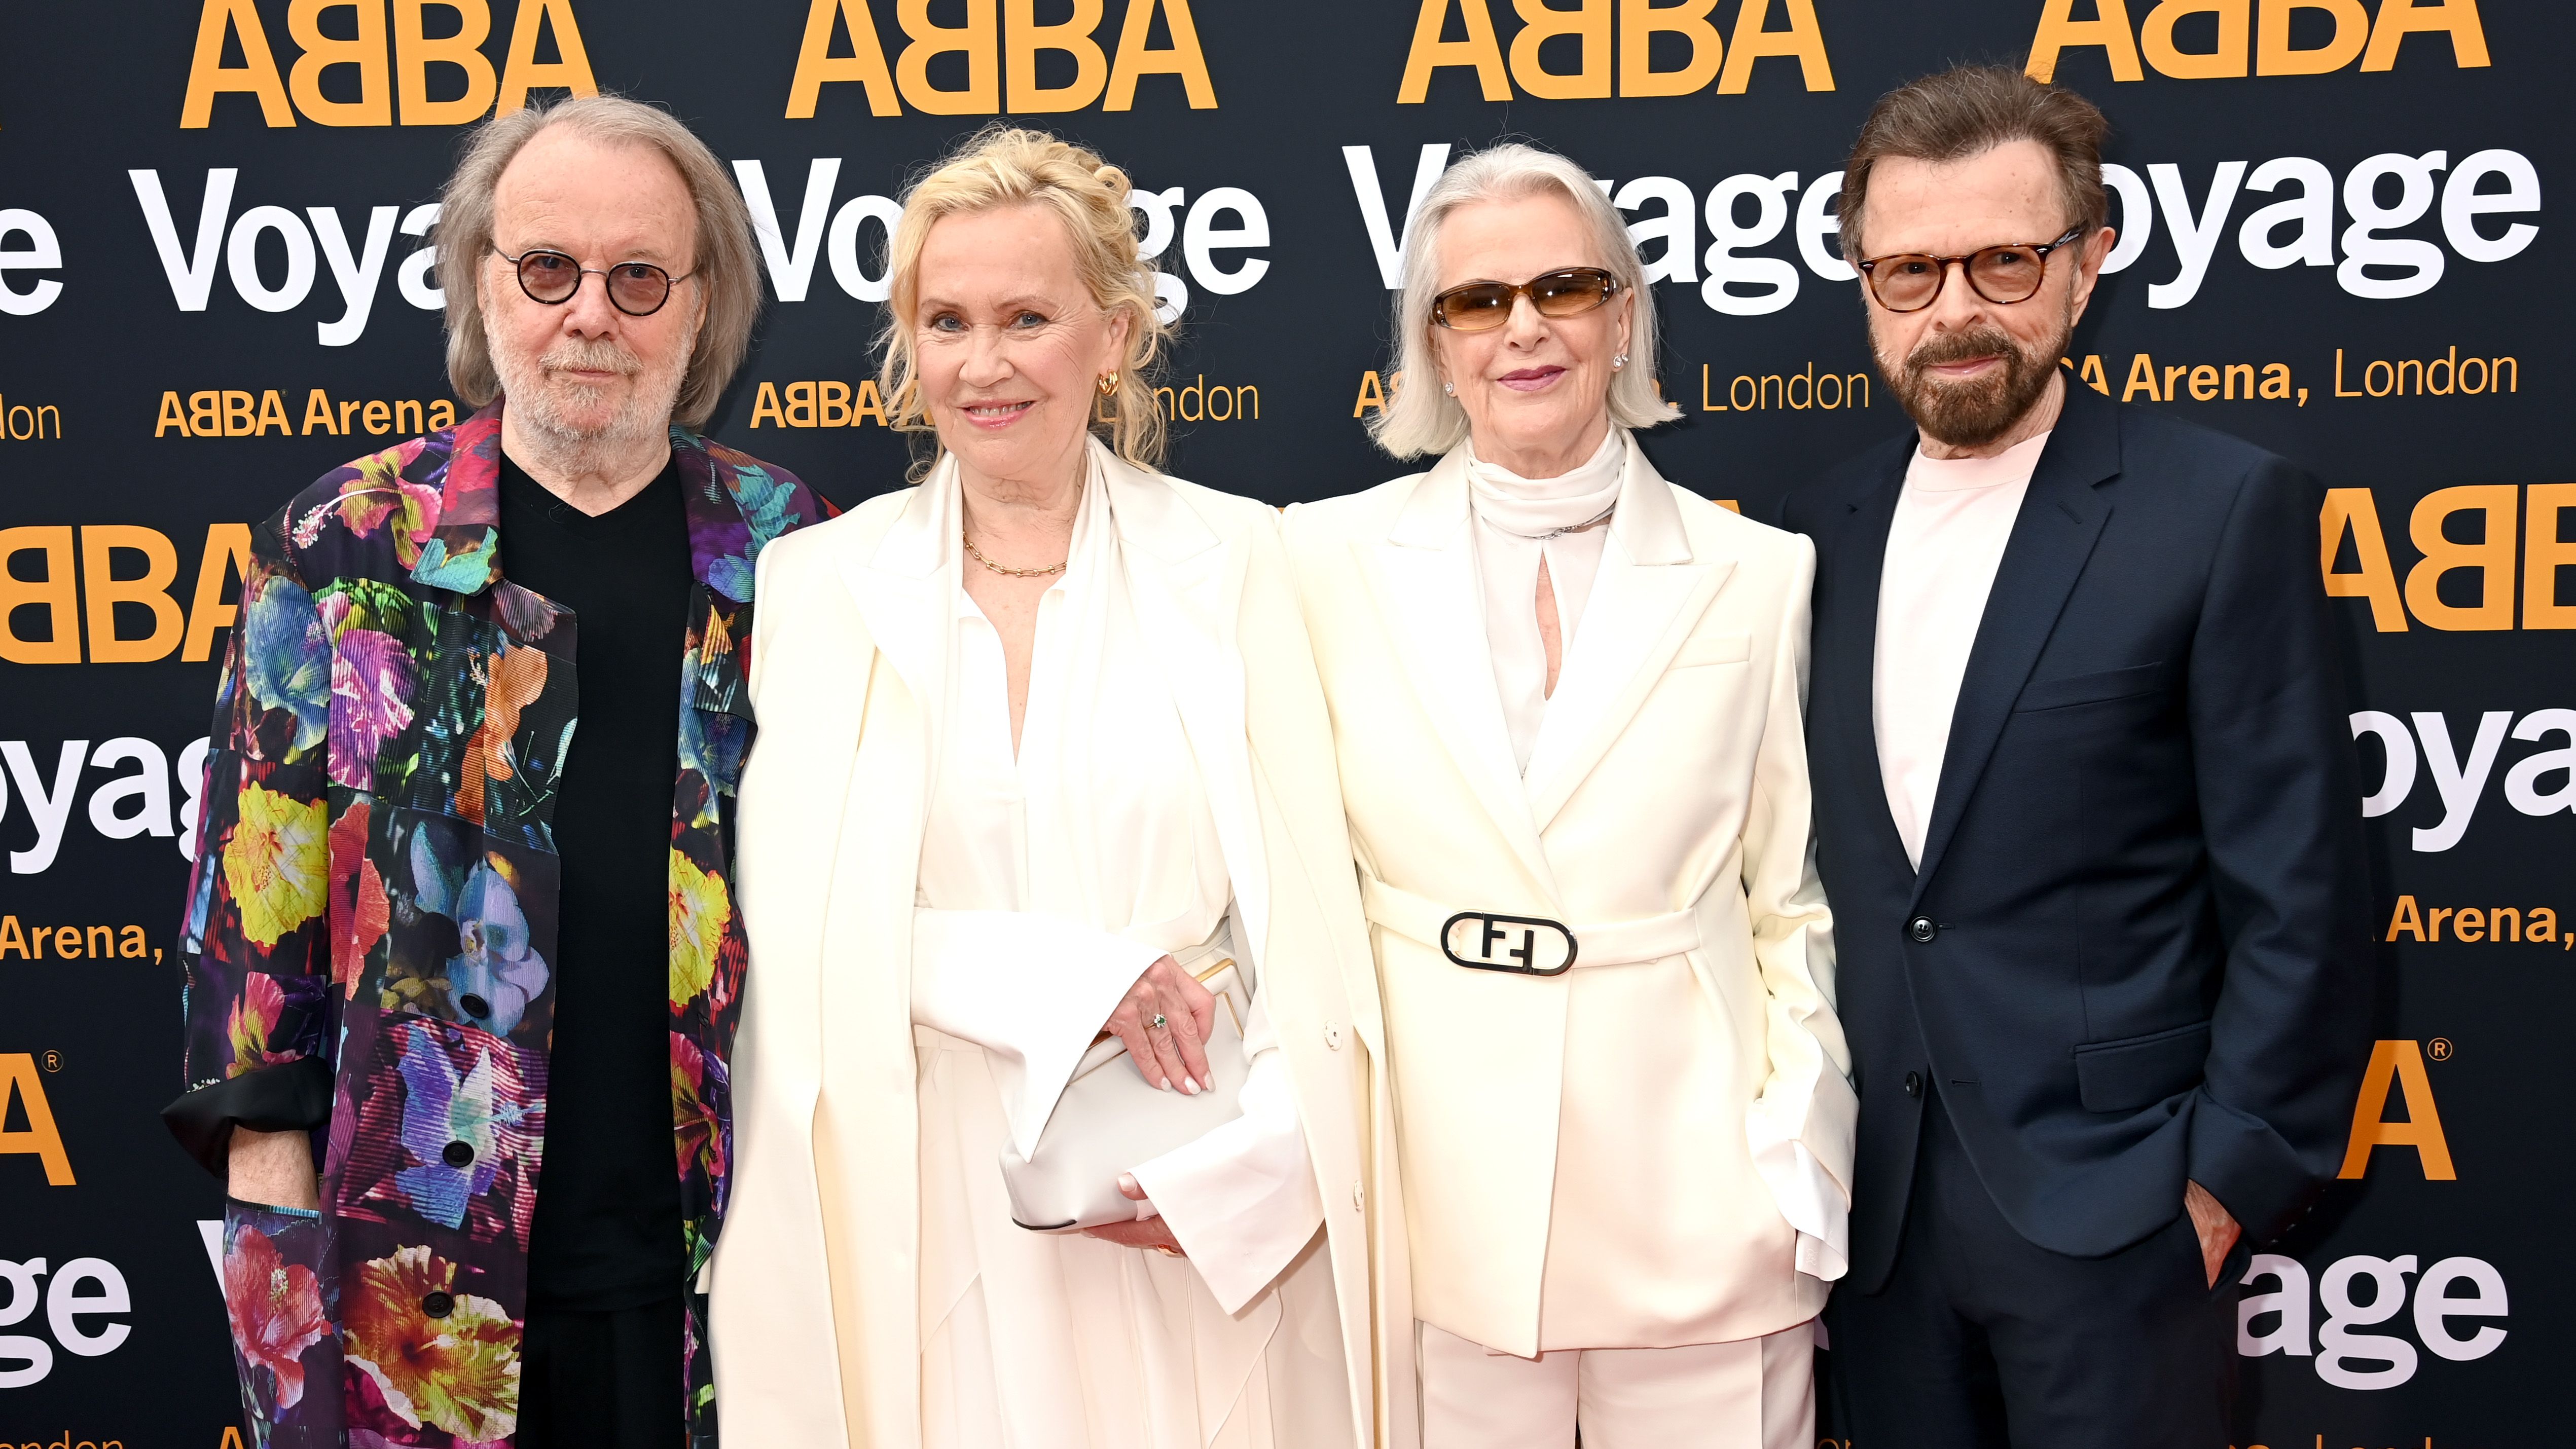 ABBA reunite on the red carpet for 'ABBA Voyage' opening night